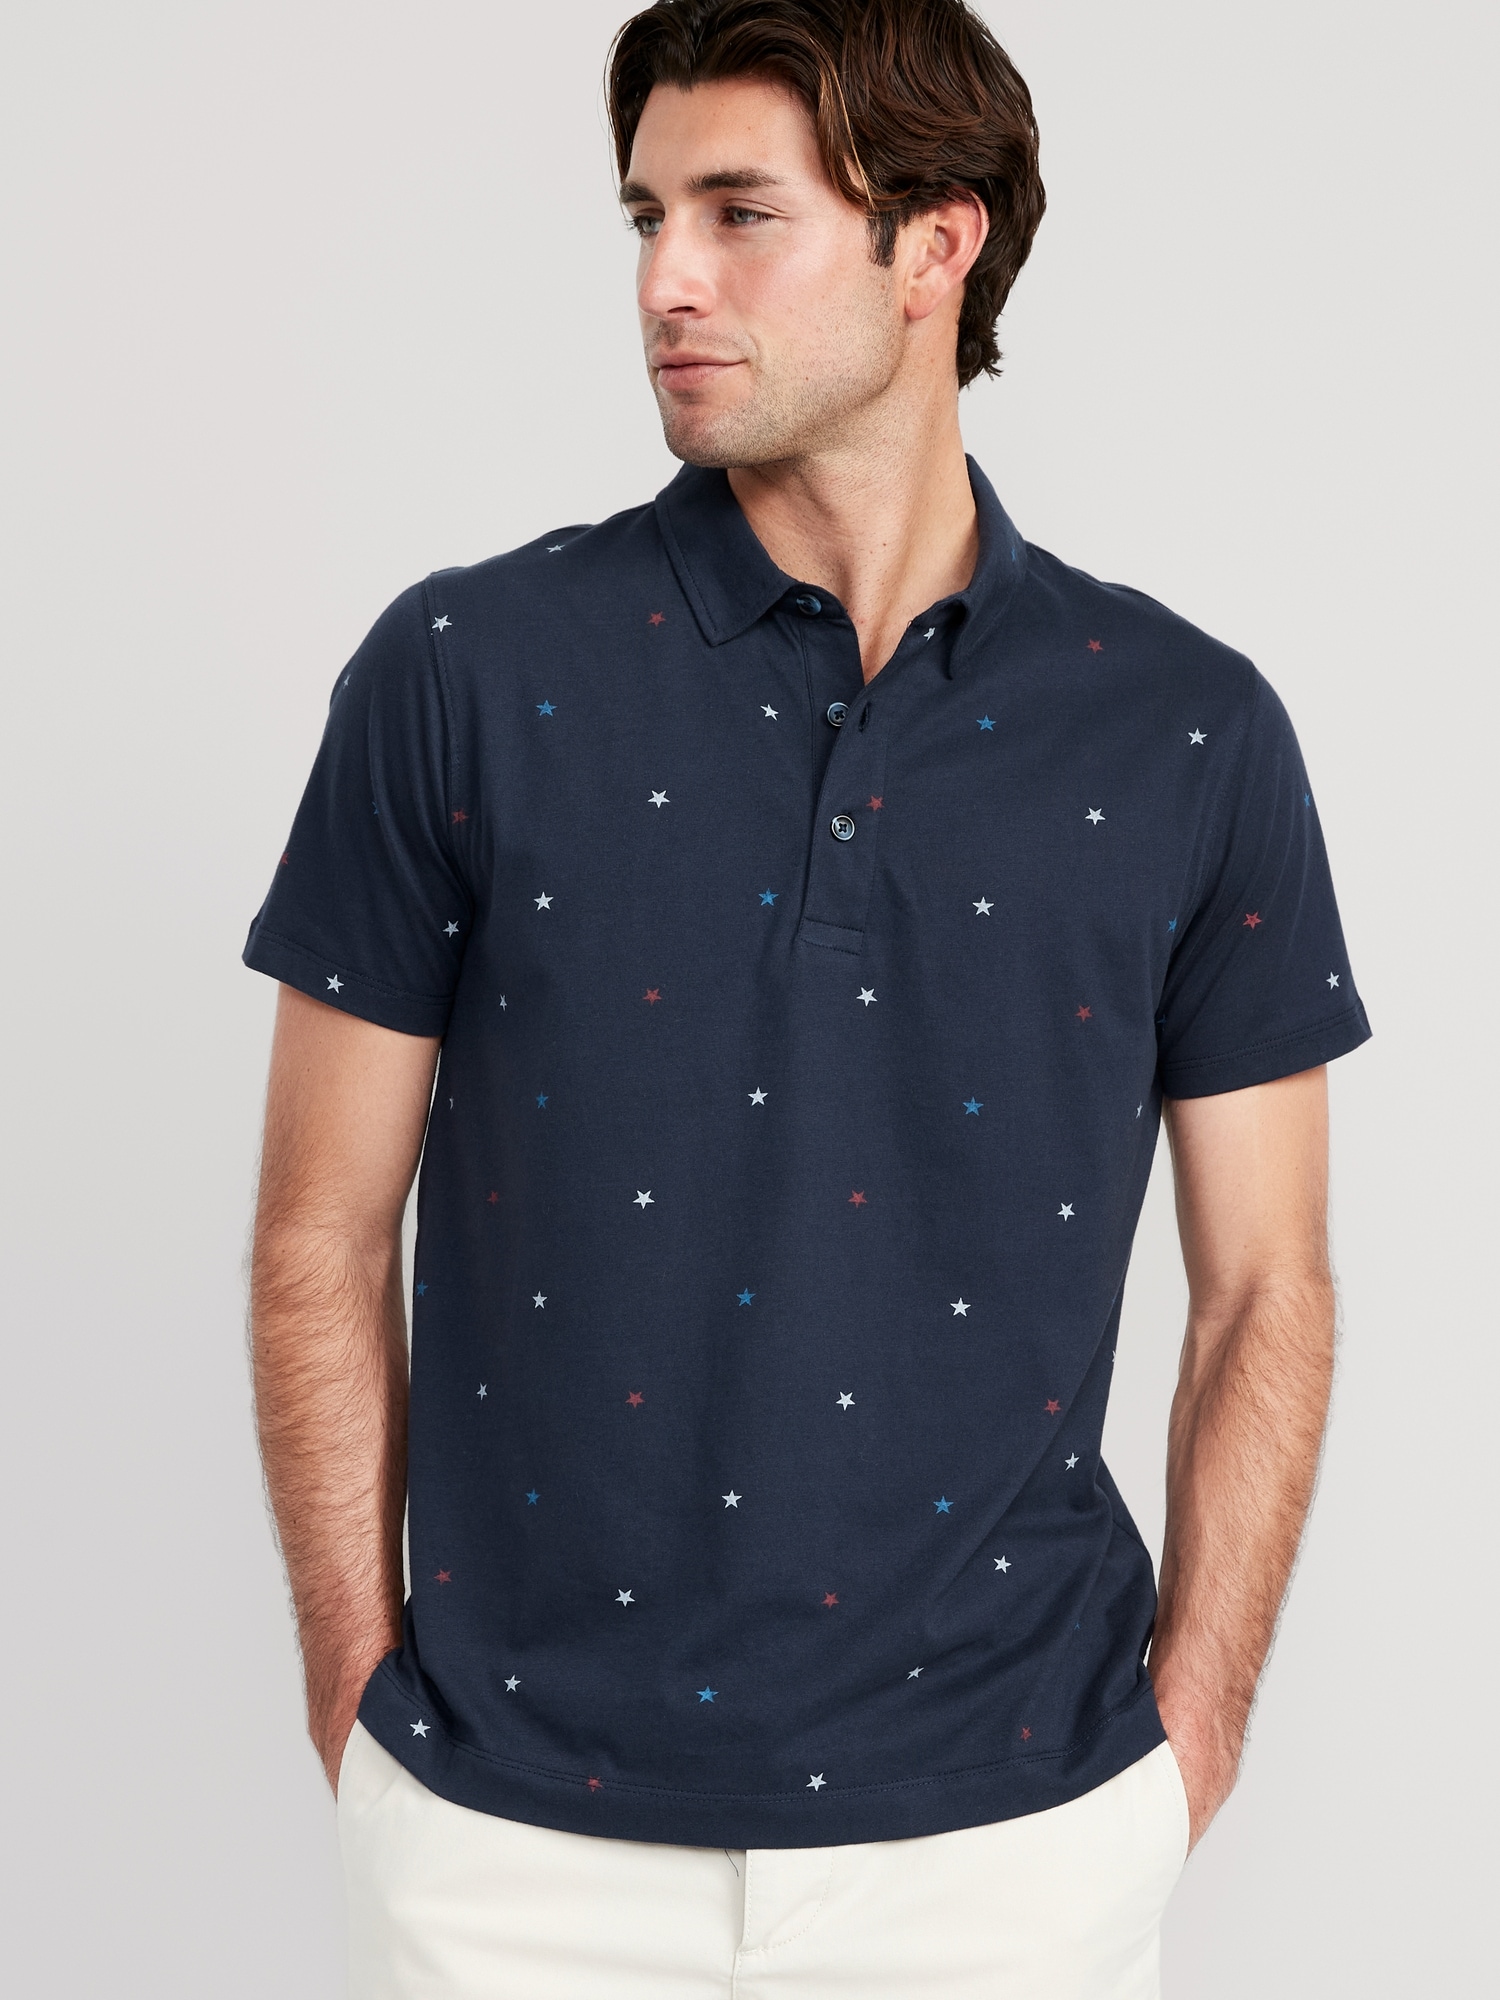 Old Navy Printed Classic Fit Jersey Polo for Men multi. 1